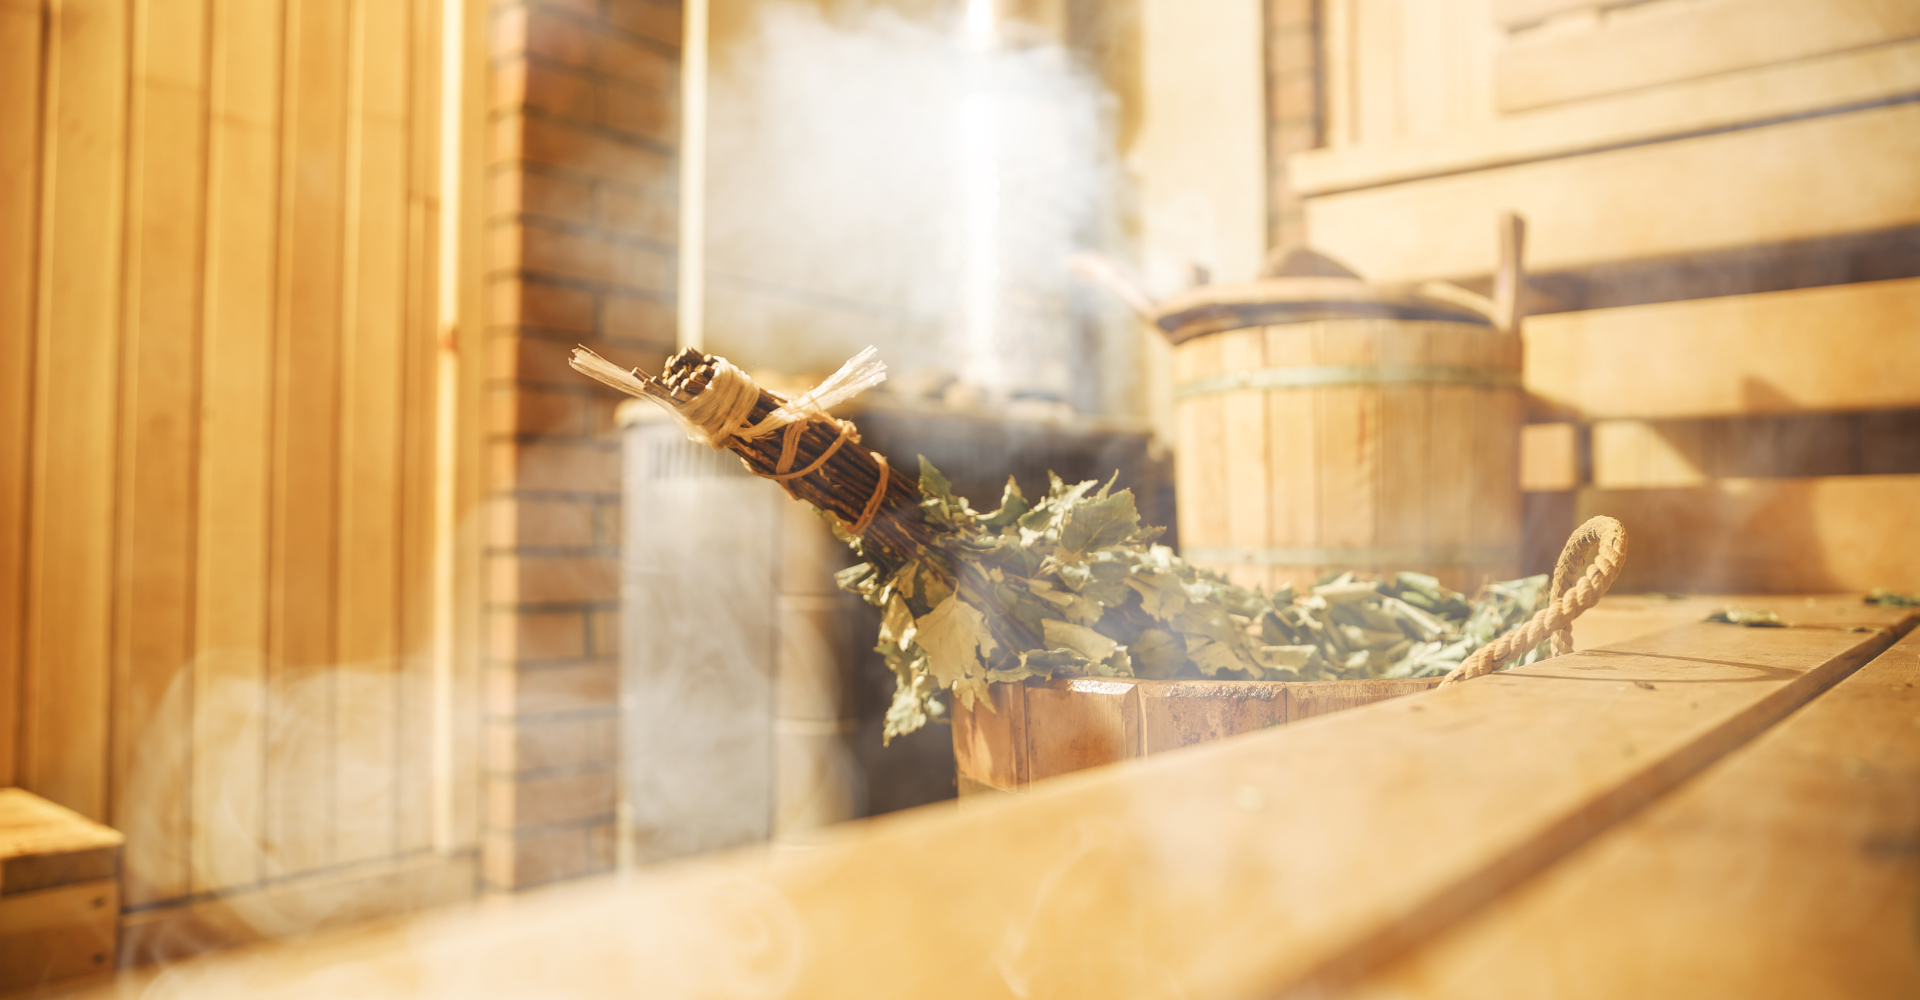 Can Using a Sauna Help Relieve Cold Symptoms? Exploring the Benefits of Sauna for Colds